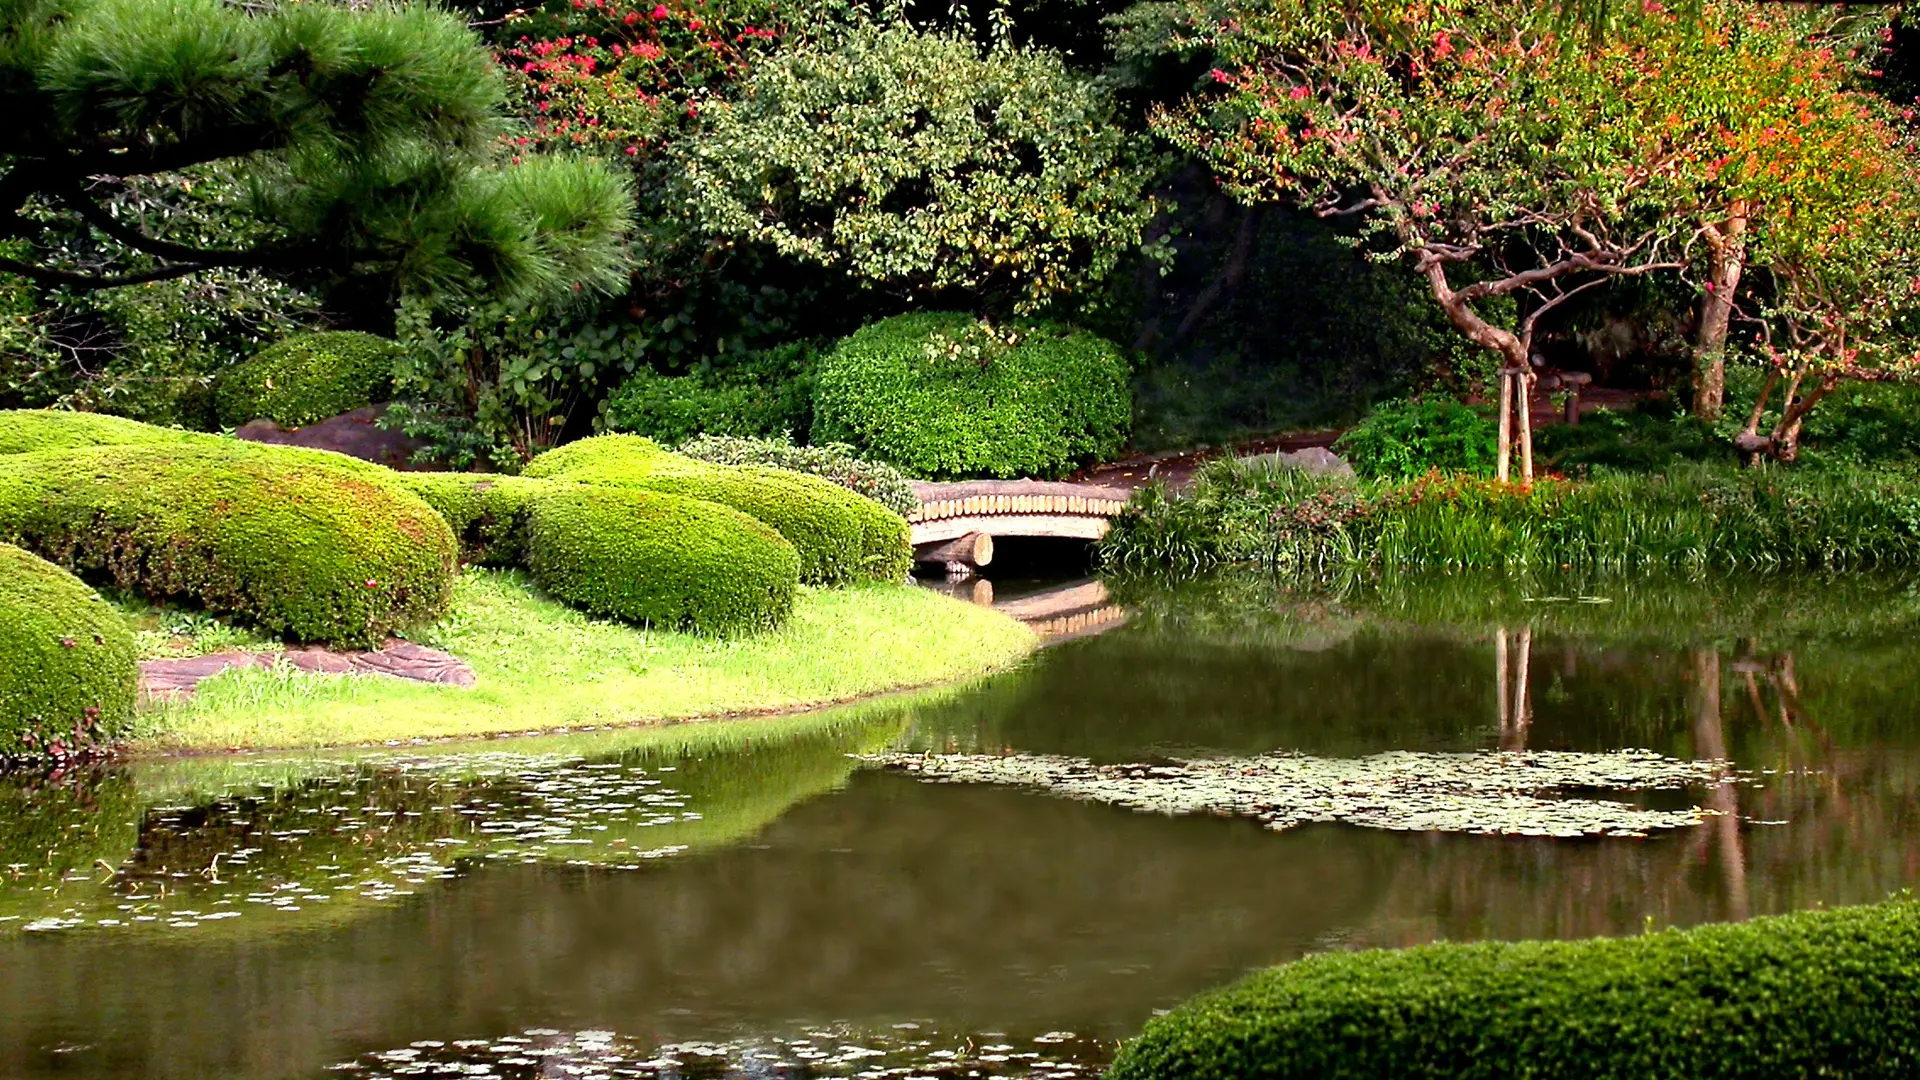 Different type of trees, lake, green forest and wooden bridge in The East Gardens of the Imperial Palace.